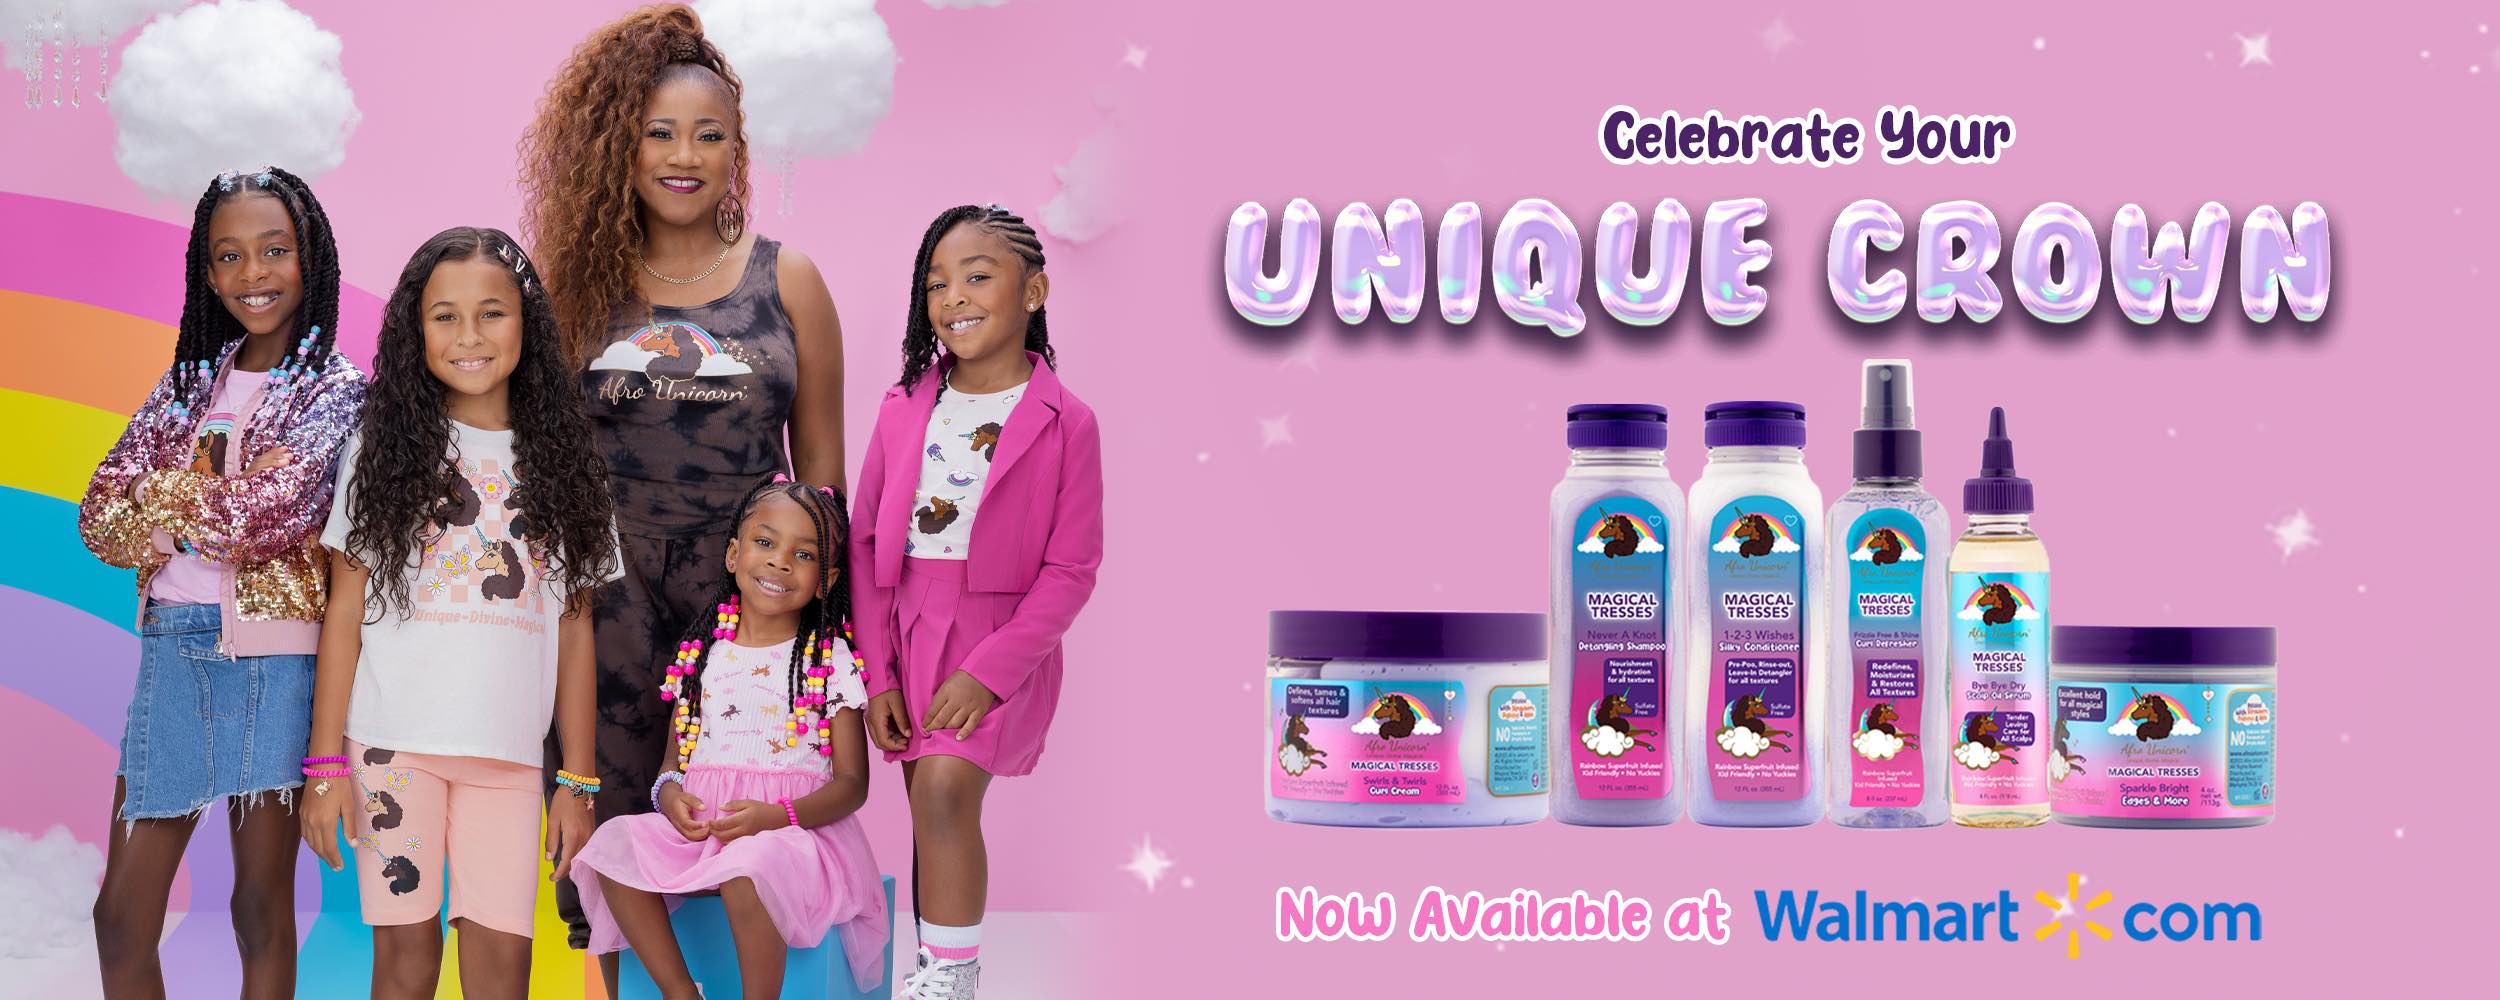 Banner image featuring founder April with four models with the text celebrate your unique crown.